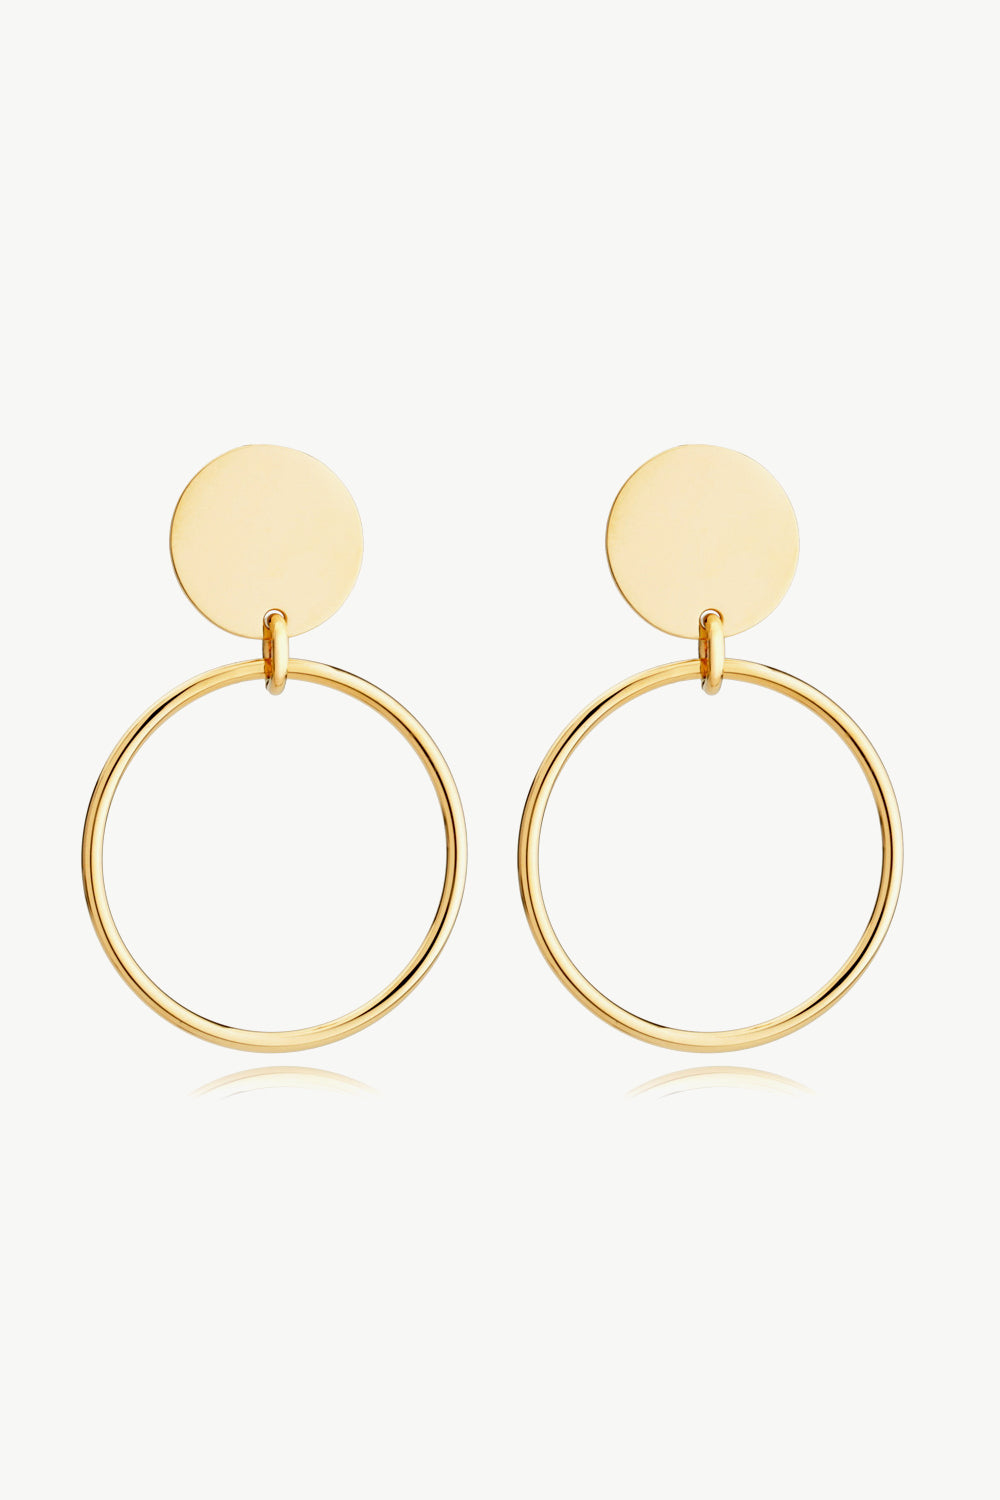 White Smoke Gold-Plated Stainless Steel Drop Earrings